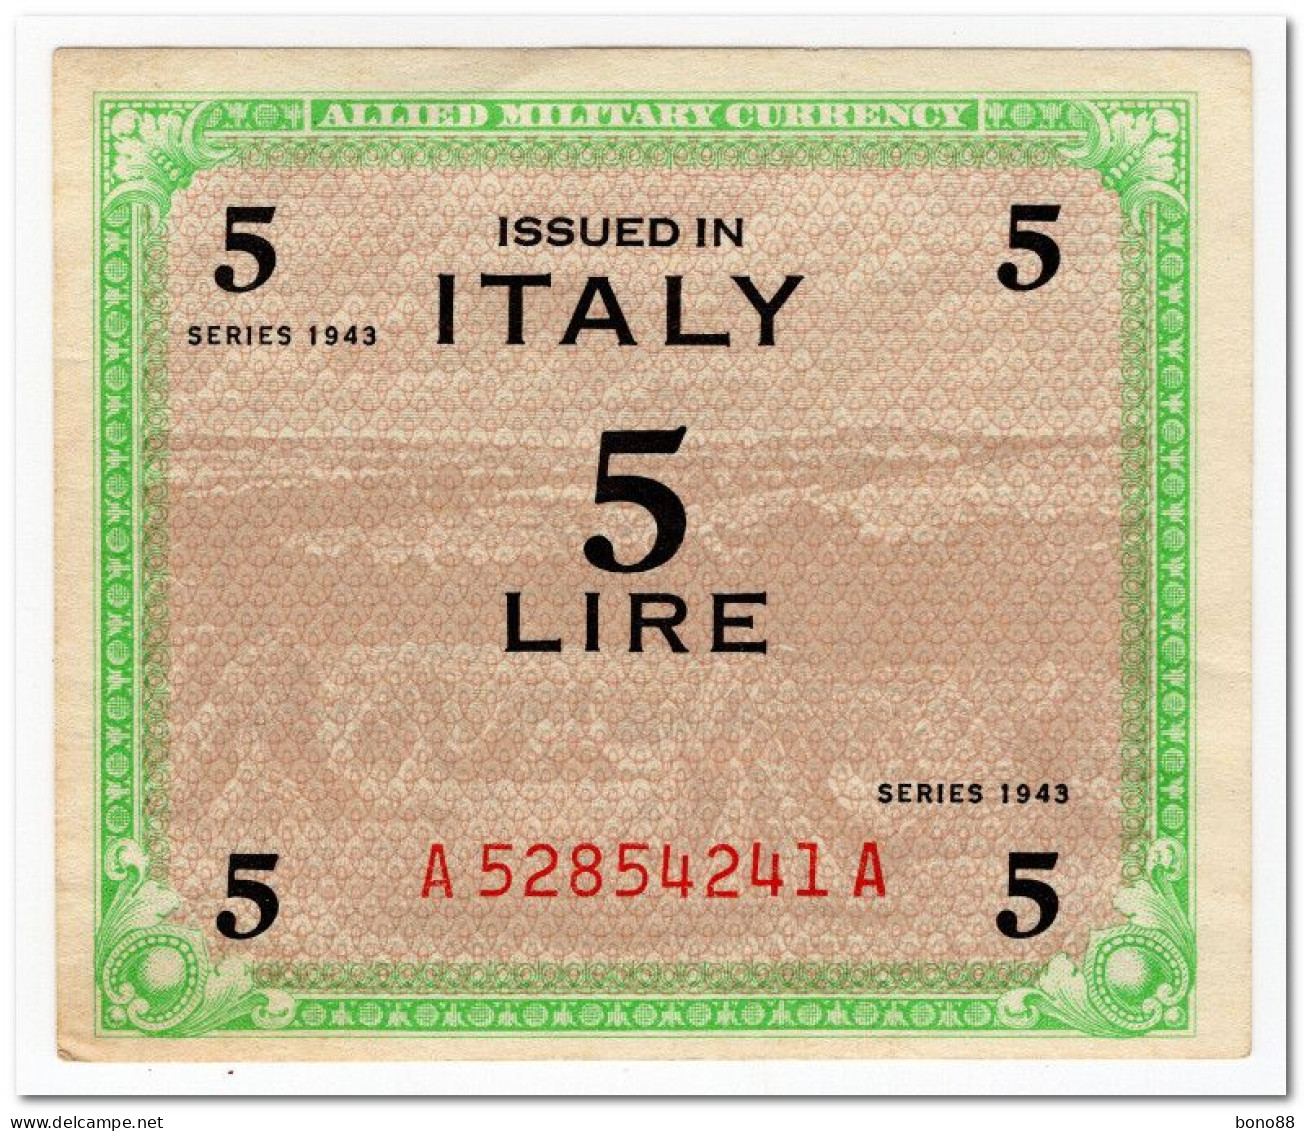 ITALY,ALLIED MILITARY CURRENCY,5 LIRE,1943,P.M12,XF+ - Occupation Alliés Seconde Guerre Mondiale